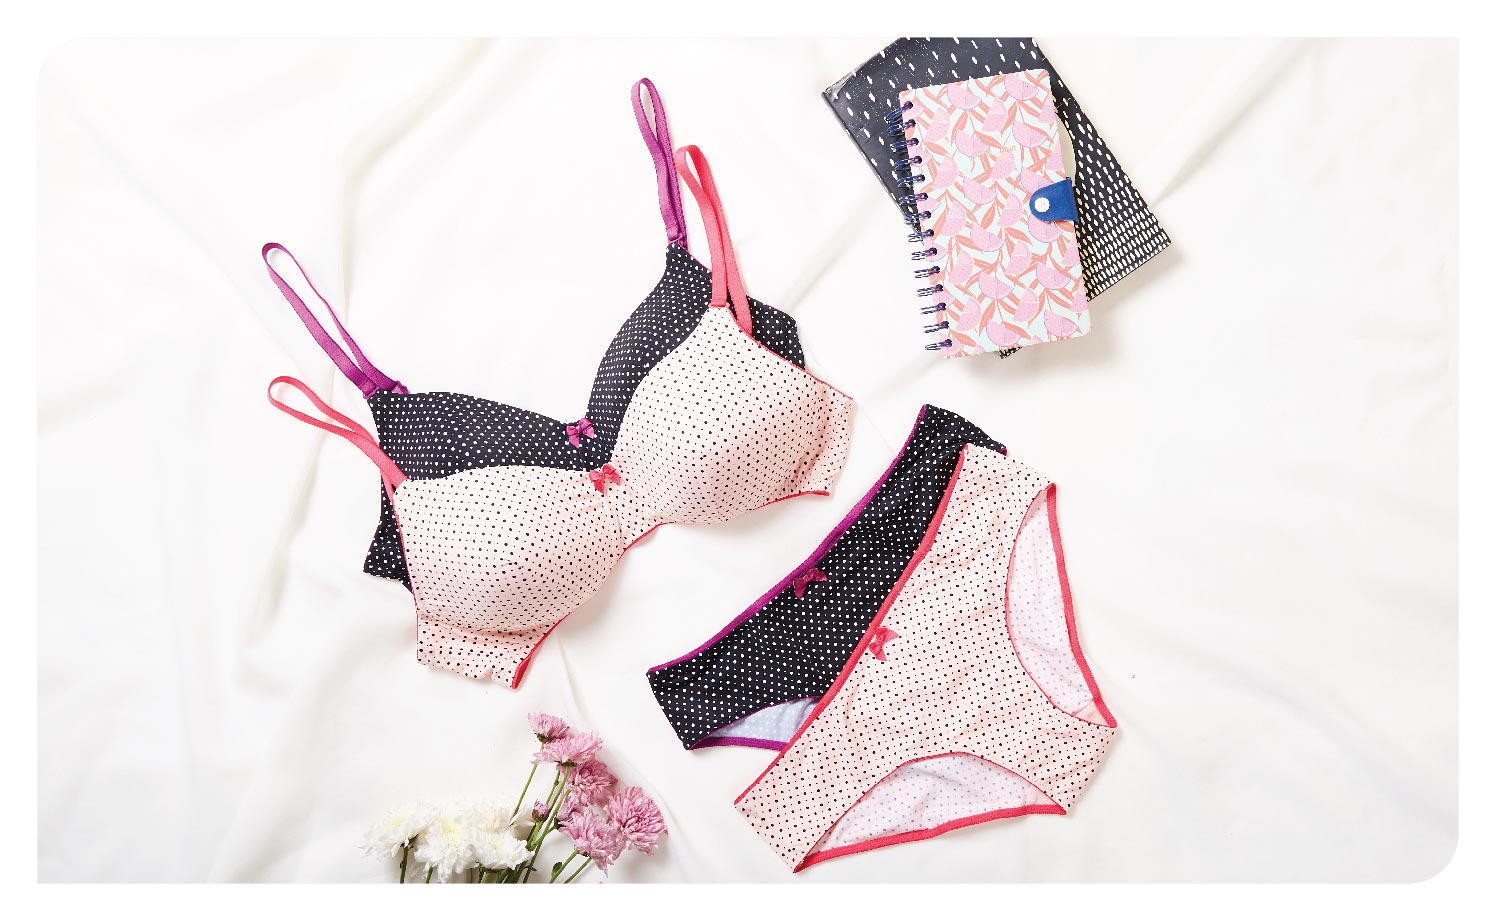 Underwear care: How to wash your panties, bras, singlets and boxers  appropriately